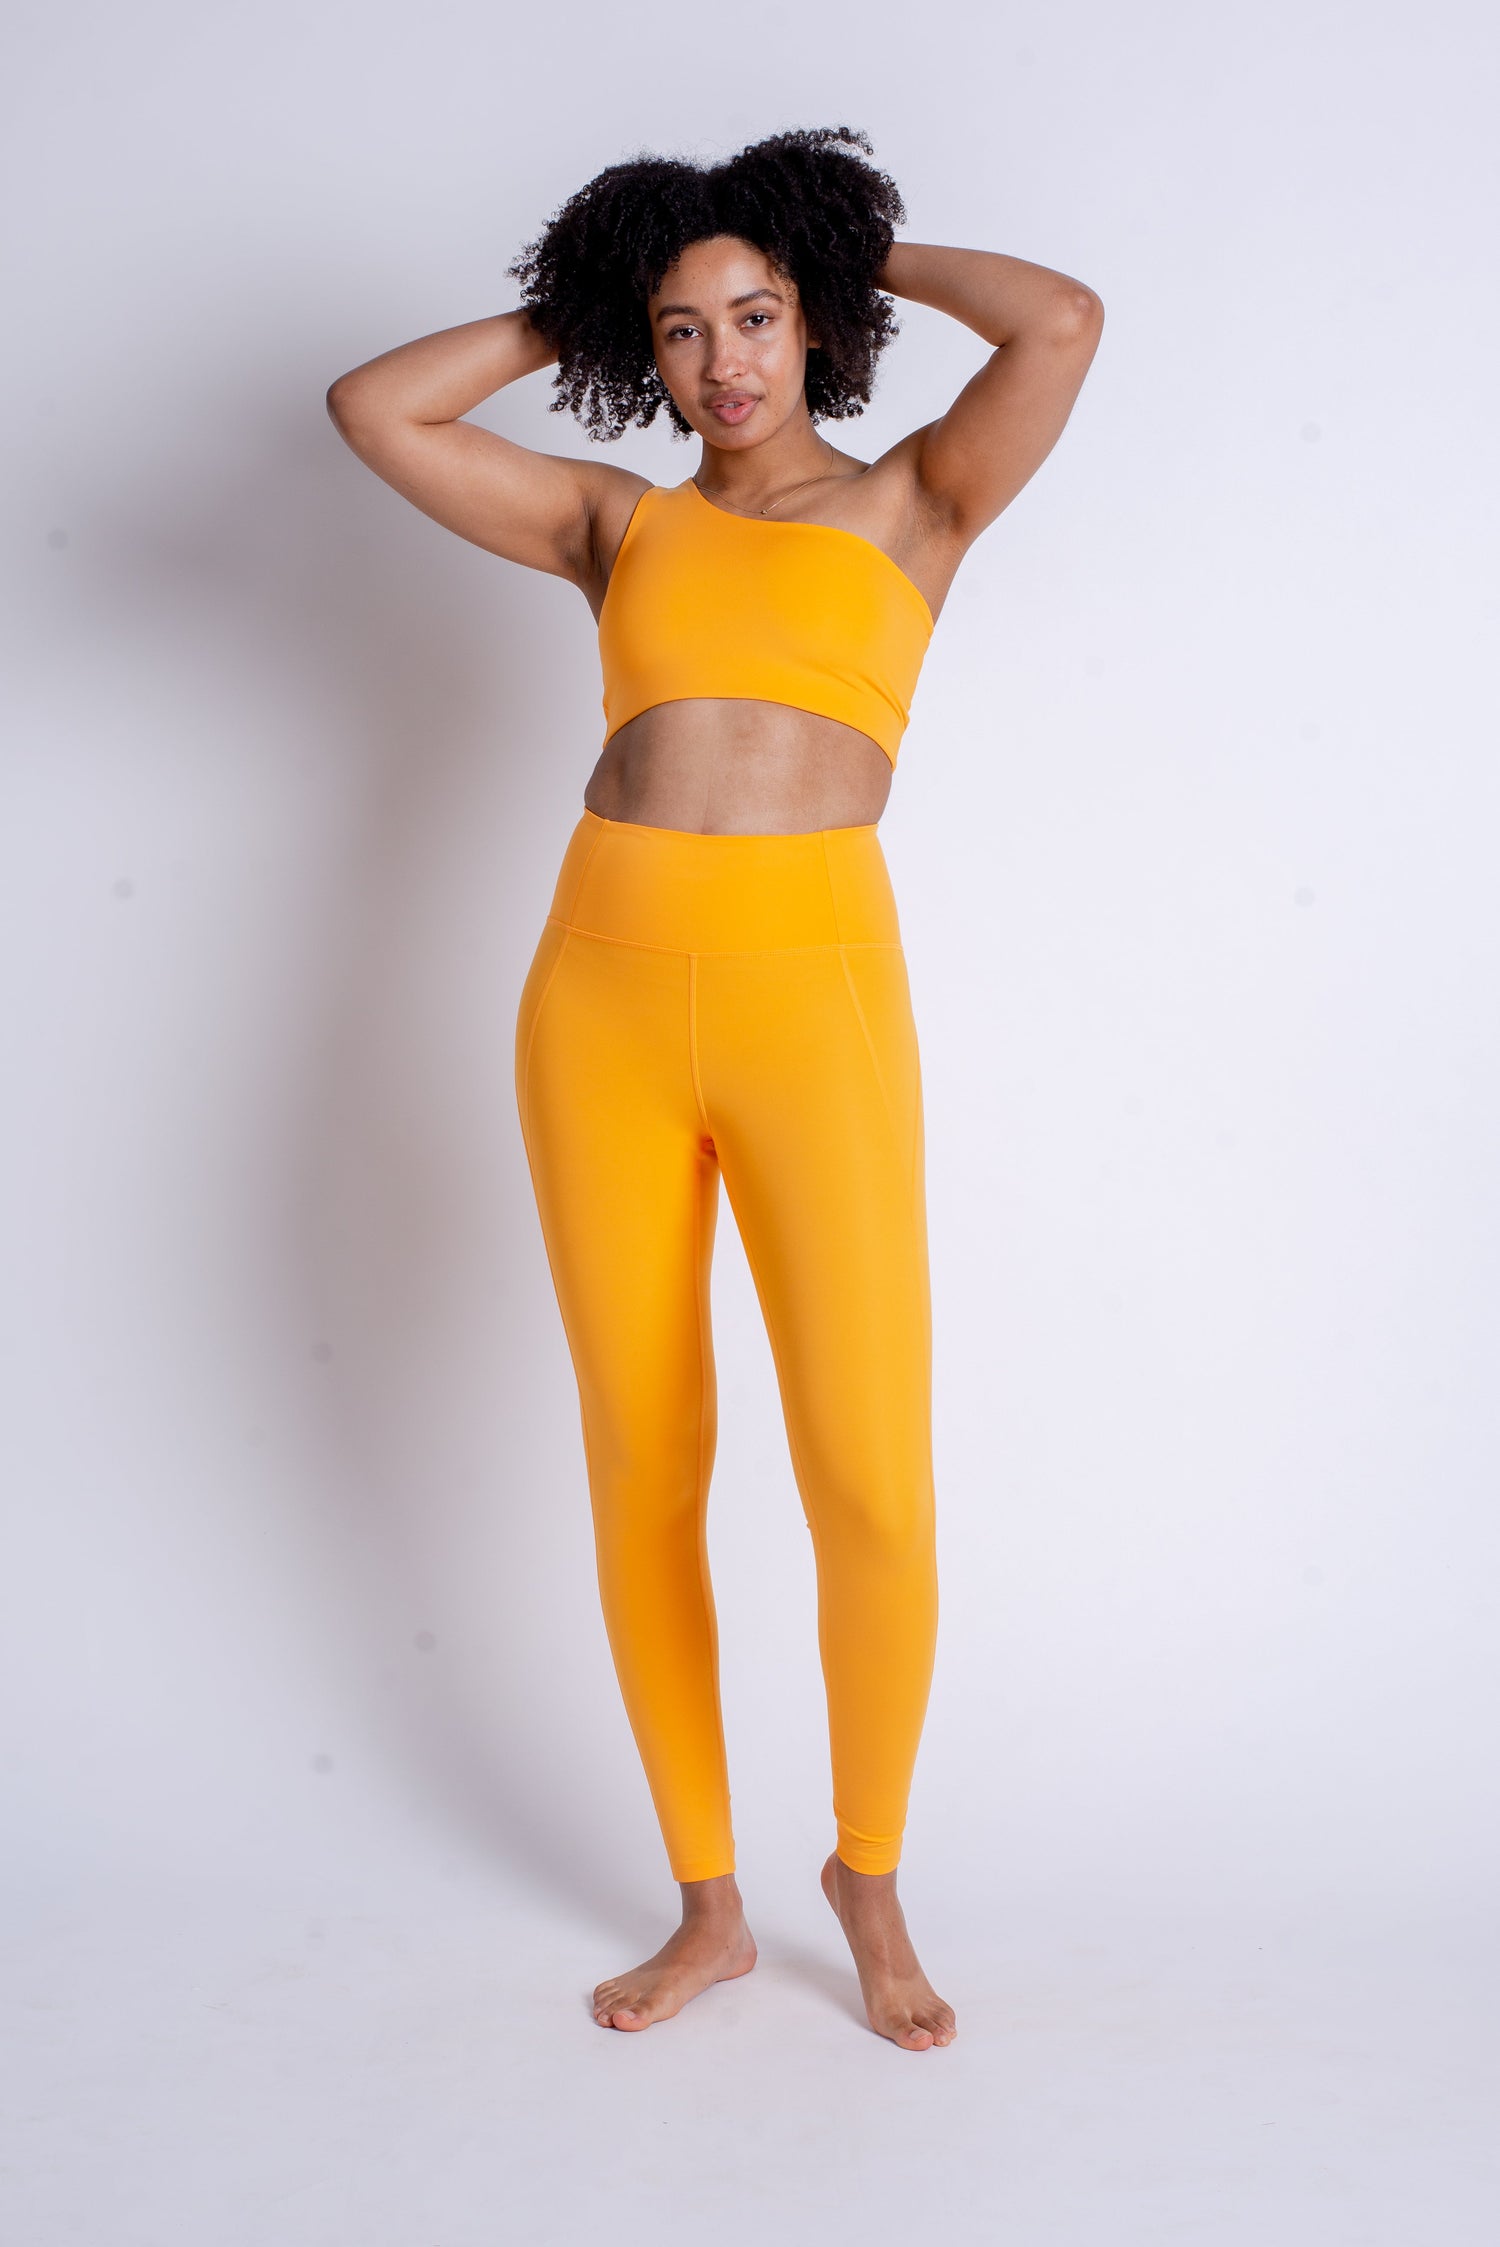 Girlfriend Collective W's Compressive Legging - Limited Colors - Made From Recycled Plastic Bottles Orange Zest Normal Pants